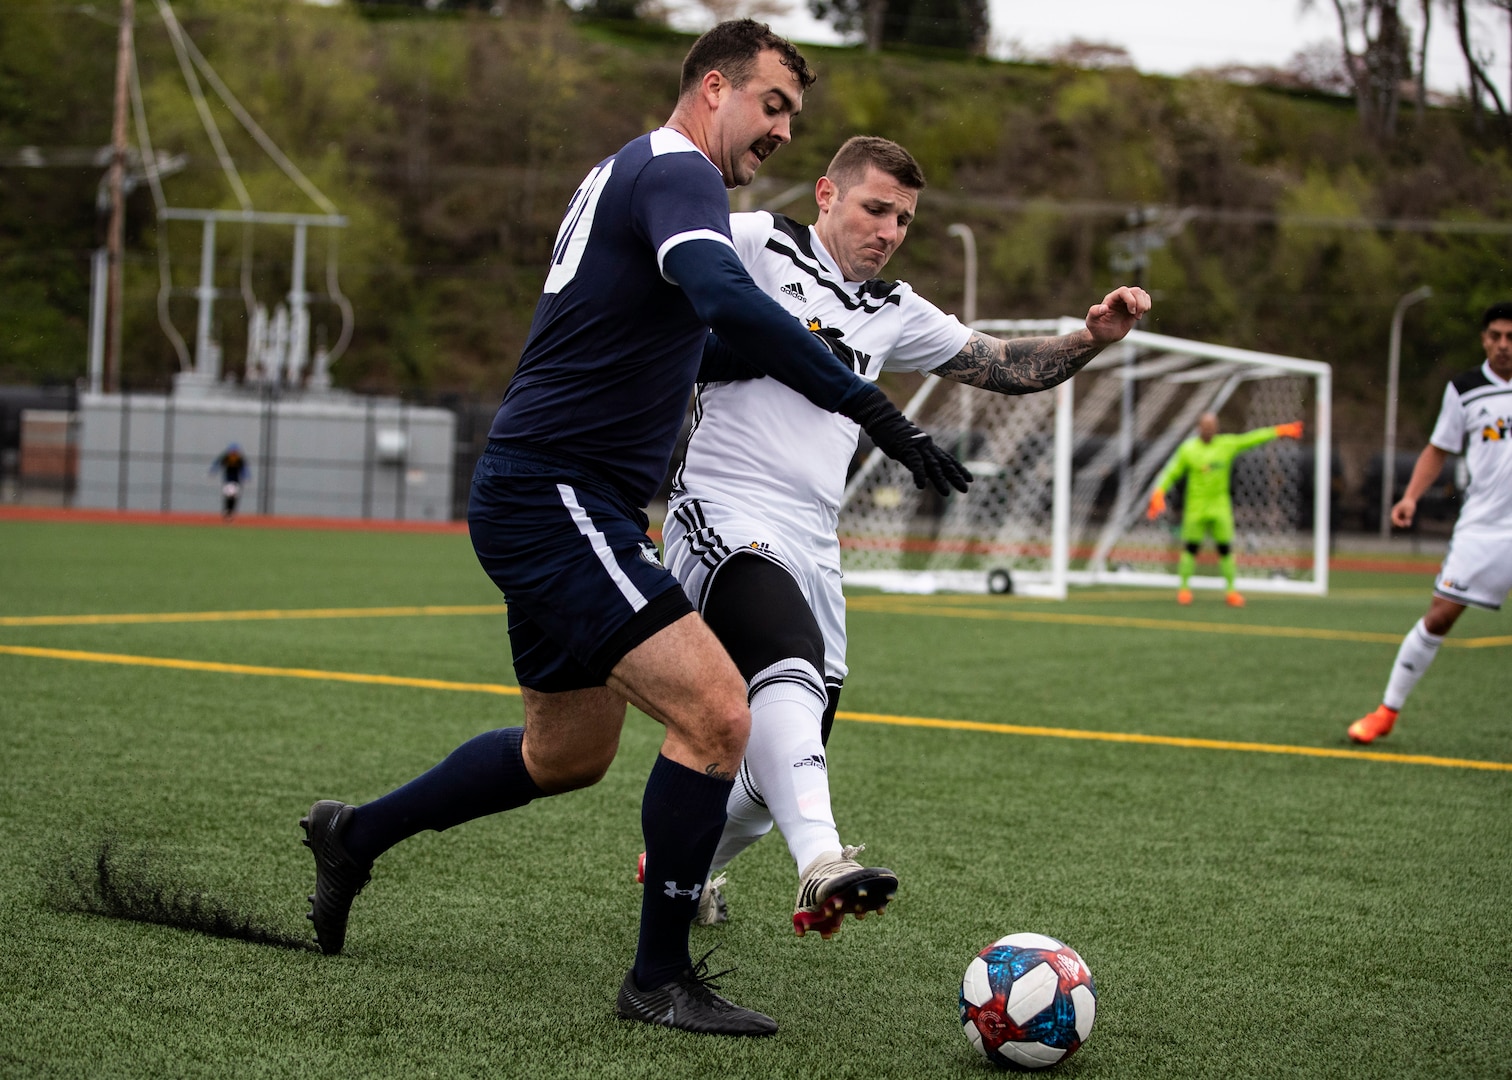 NAVAL STATION EVERETT, Wa. (April 16, 2019) - Petty Officer Michael Williams, stationed at Naval Construction Battalion Center Gulfport, MS., from the Navy soccer team drives the ball against 1st Lt. Andrew Stames, stationed at Fort Bragg, NC., from the Army soccer team during a second round match of the Armed Forces Sports Men’s Soccer Championship hosted at Naval Station Everett. (U.S. Navy Photo by Mass Communication Specialist 2nd Class Ian Carver/RELEASED).